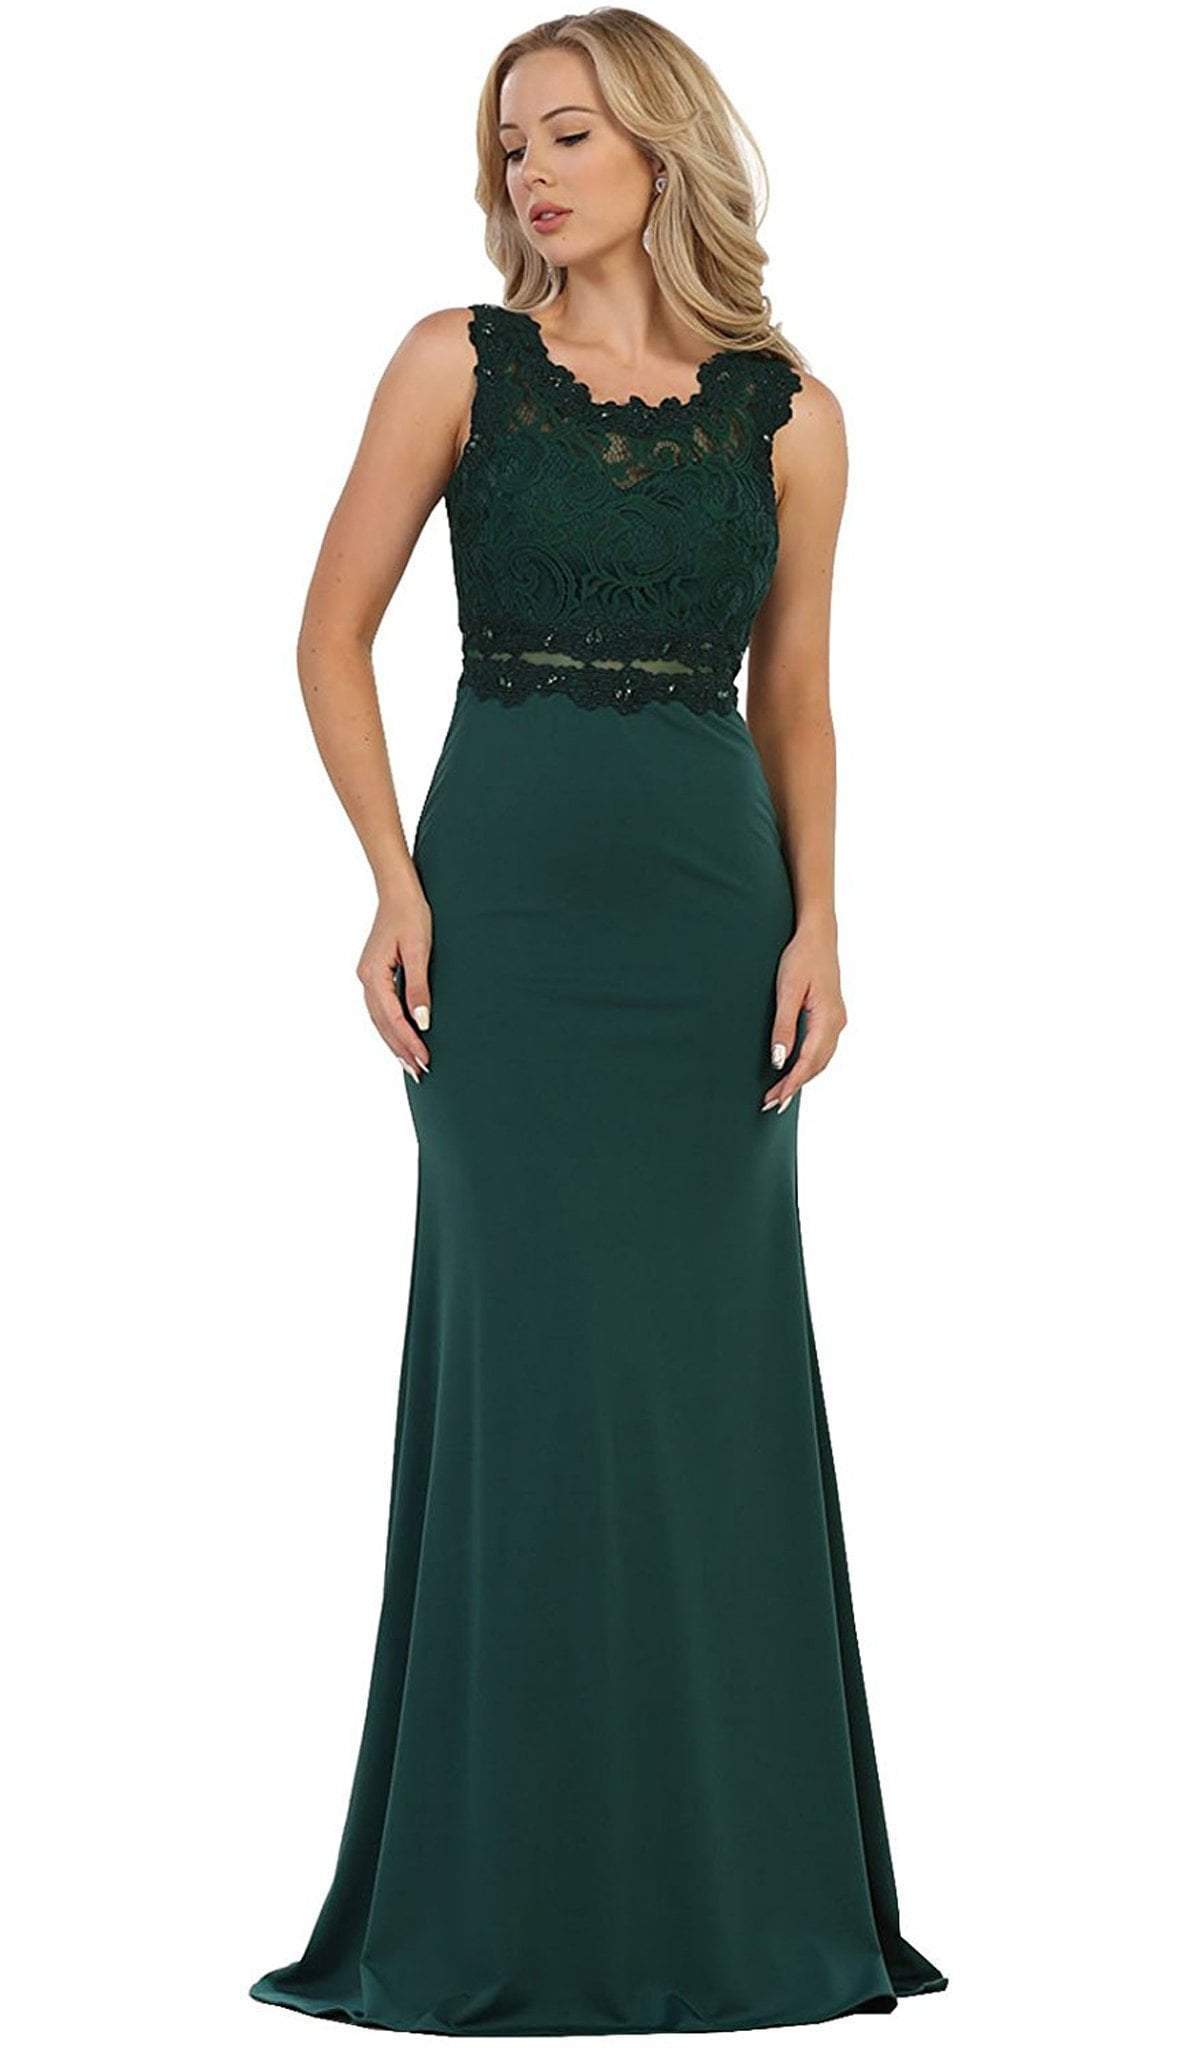 May Queen - Lace Bodice Illusion Paneled Sheath Evening Gown